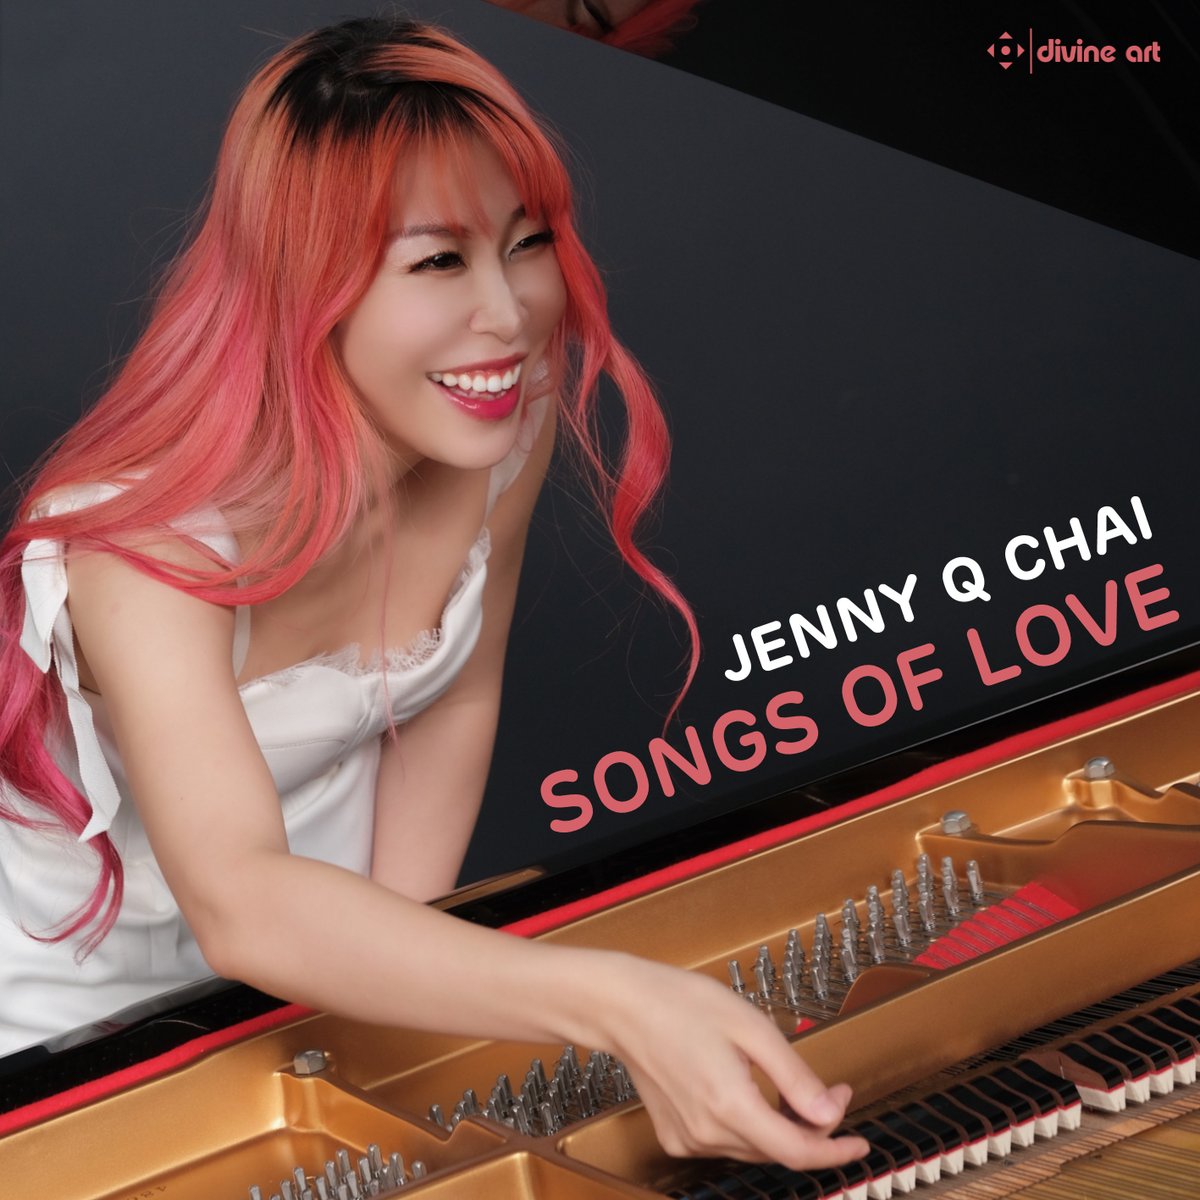 Available worldwide today: #SongsOfLove from @jennyqchai!

Listen now via https://t.co/JjTpYwB2Q0

Jenny has a special connection with Robert Schumann and a special love for Kreisleriana which she says never grows old but ’ lives inside of you’. Hence the title, “Songs of Love”. https://t.co/JPUfc8CjA0